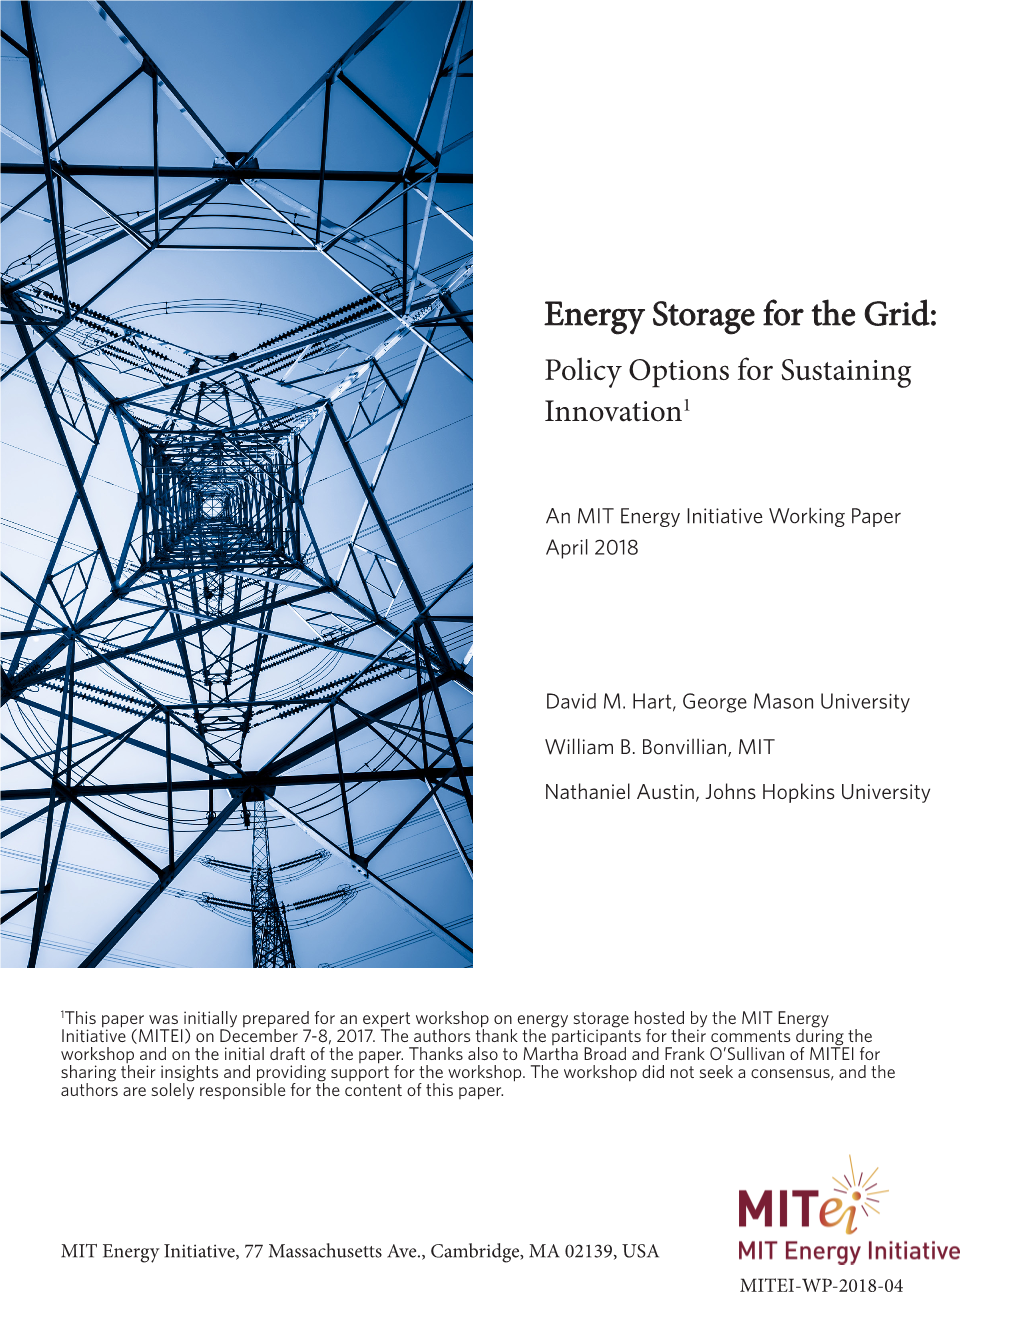 Energy Storage for the Grid: Policy Options for Sustaining Innovation1